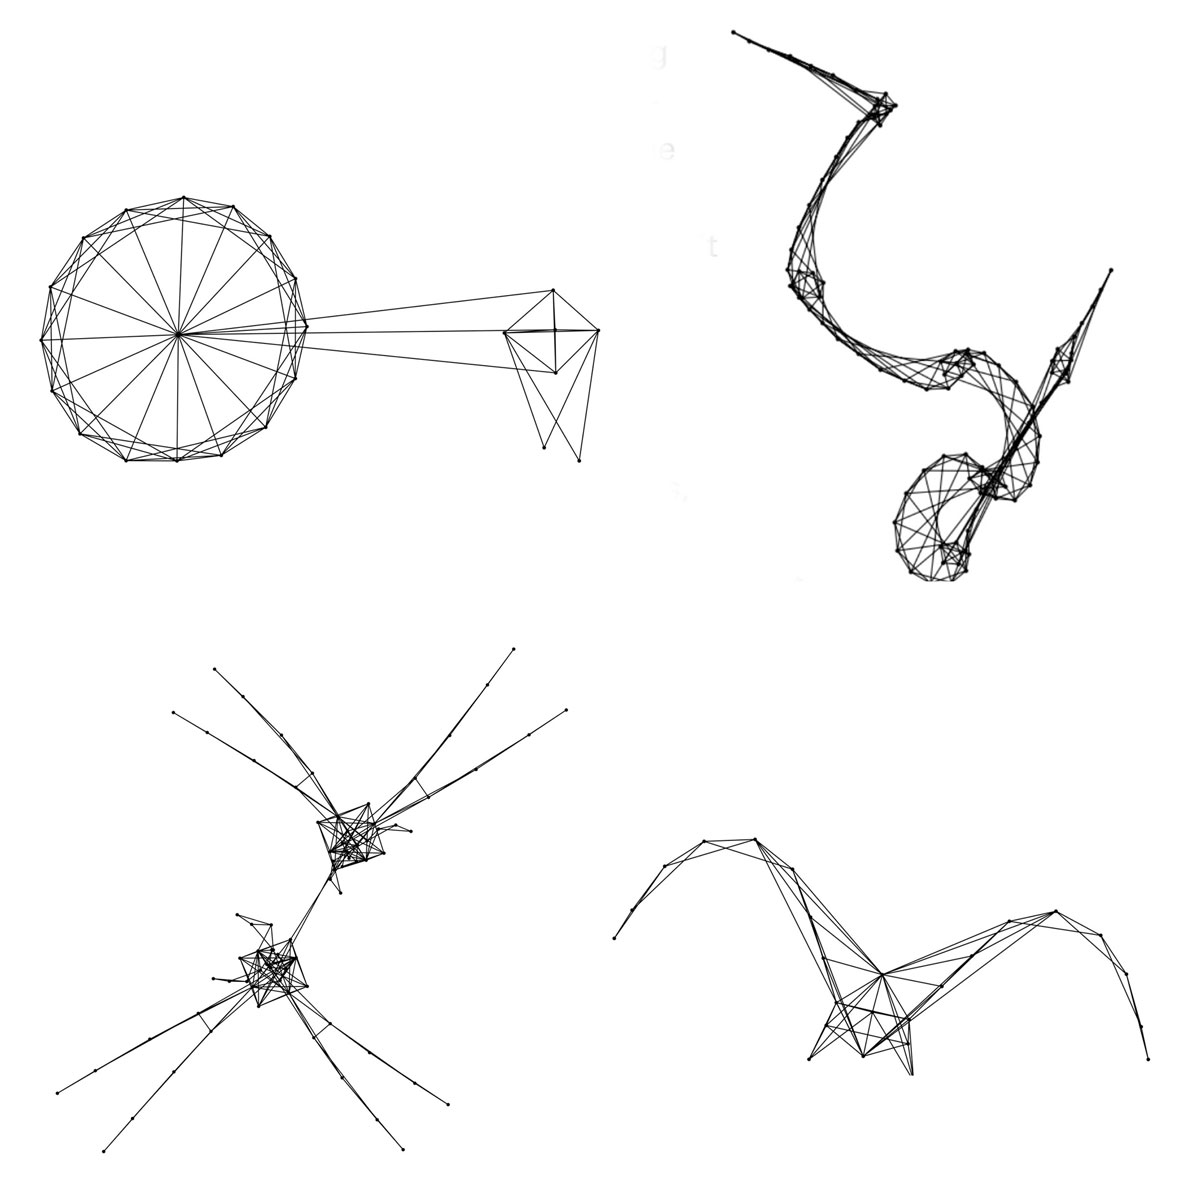 A digital illustration of four geometric models resembling living organisms, created through a program called sodaconstructor. 